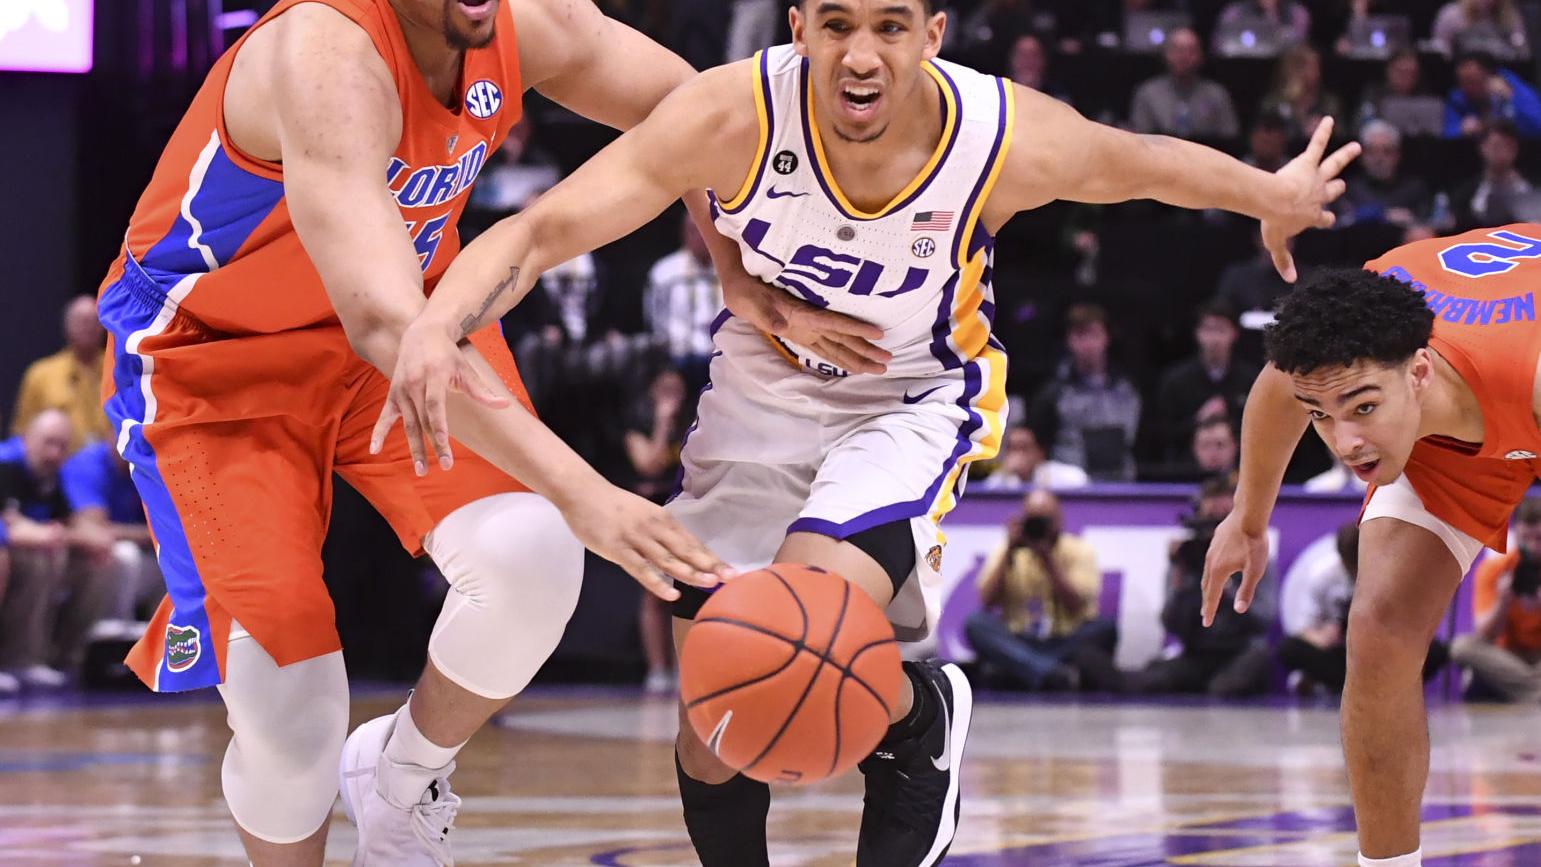 Photos: LSU drops the ball to Florida in overtime, losing 82-77